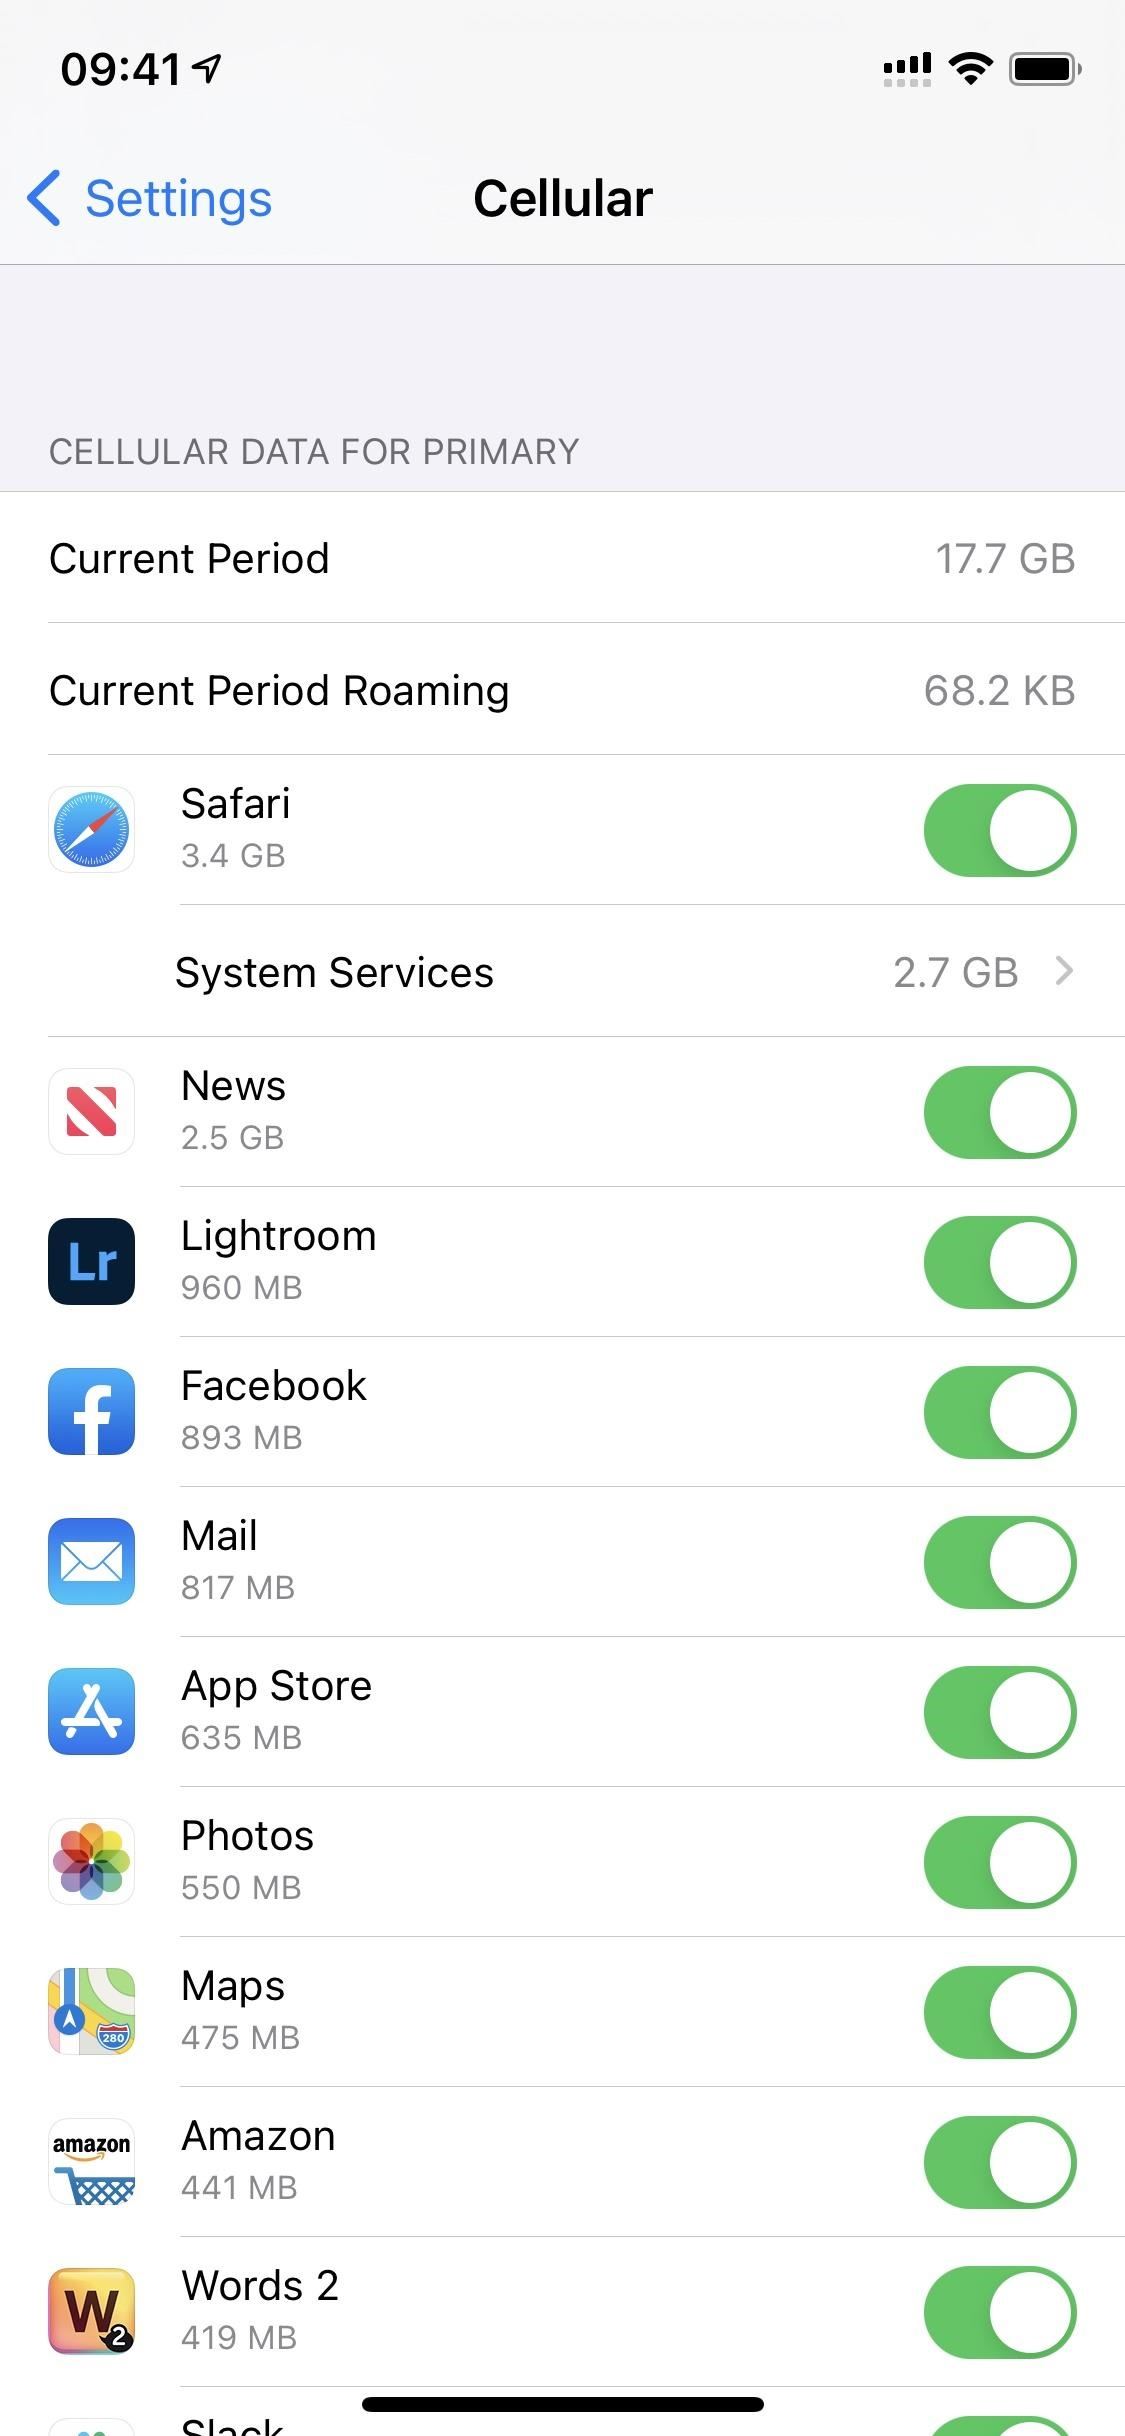 Prevent Certain Apps from Using Cellular Data on Your iPhone to Stay Below Data Caps or Avoid Throttling